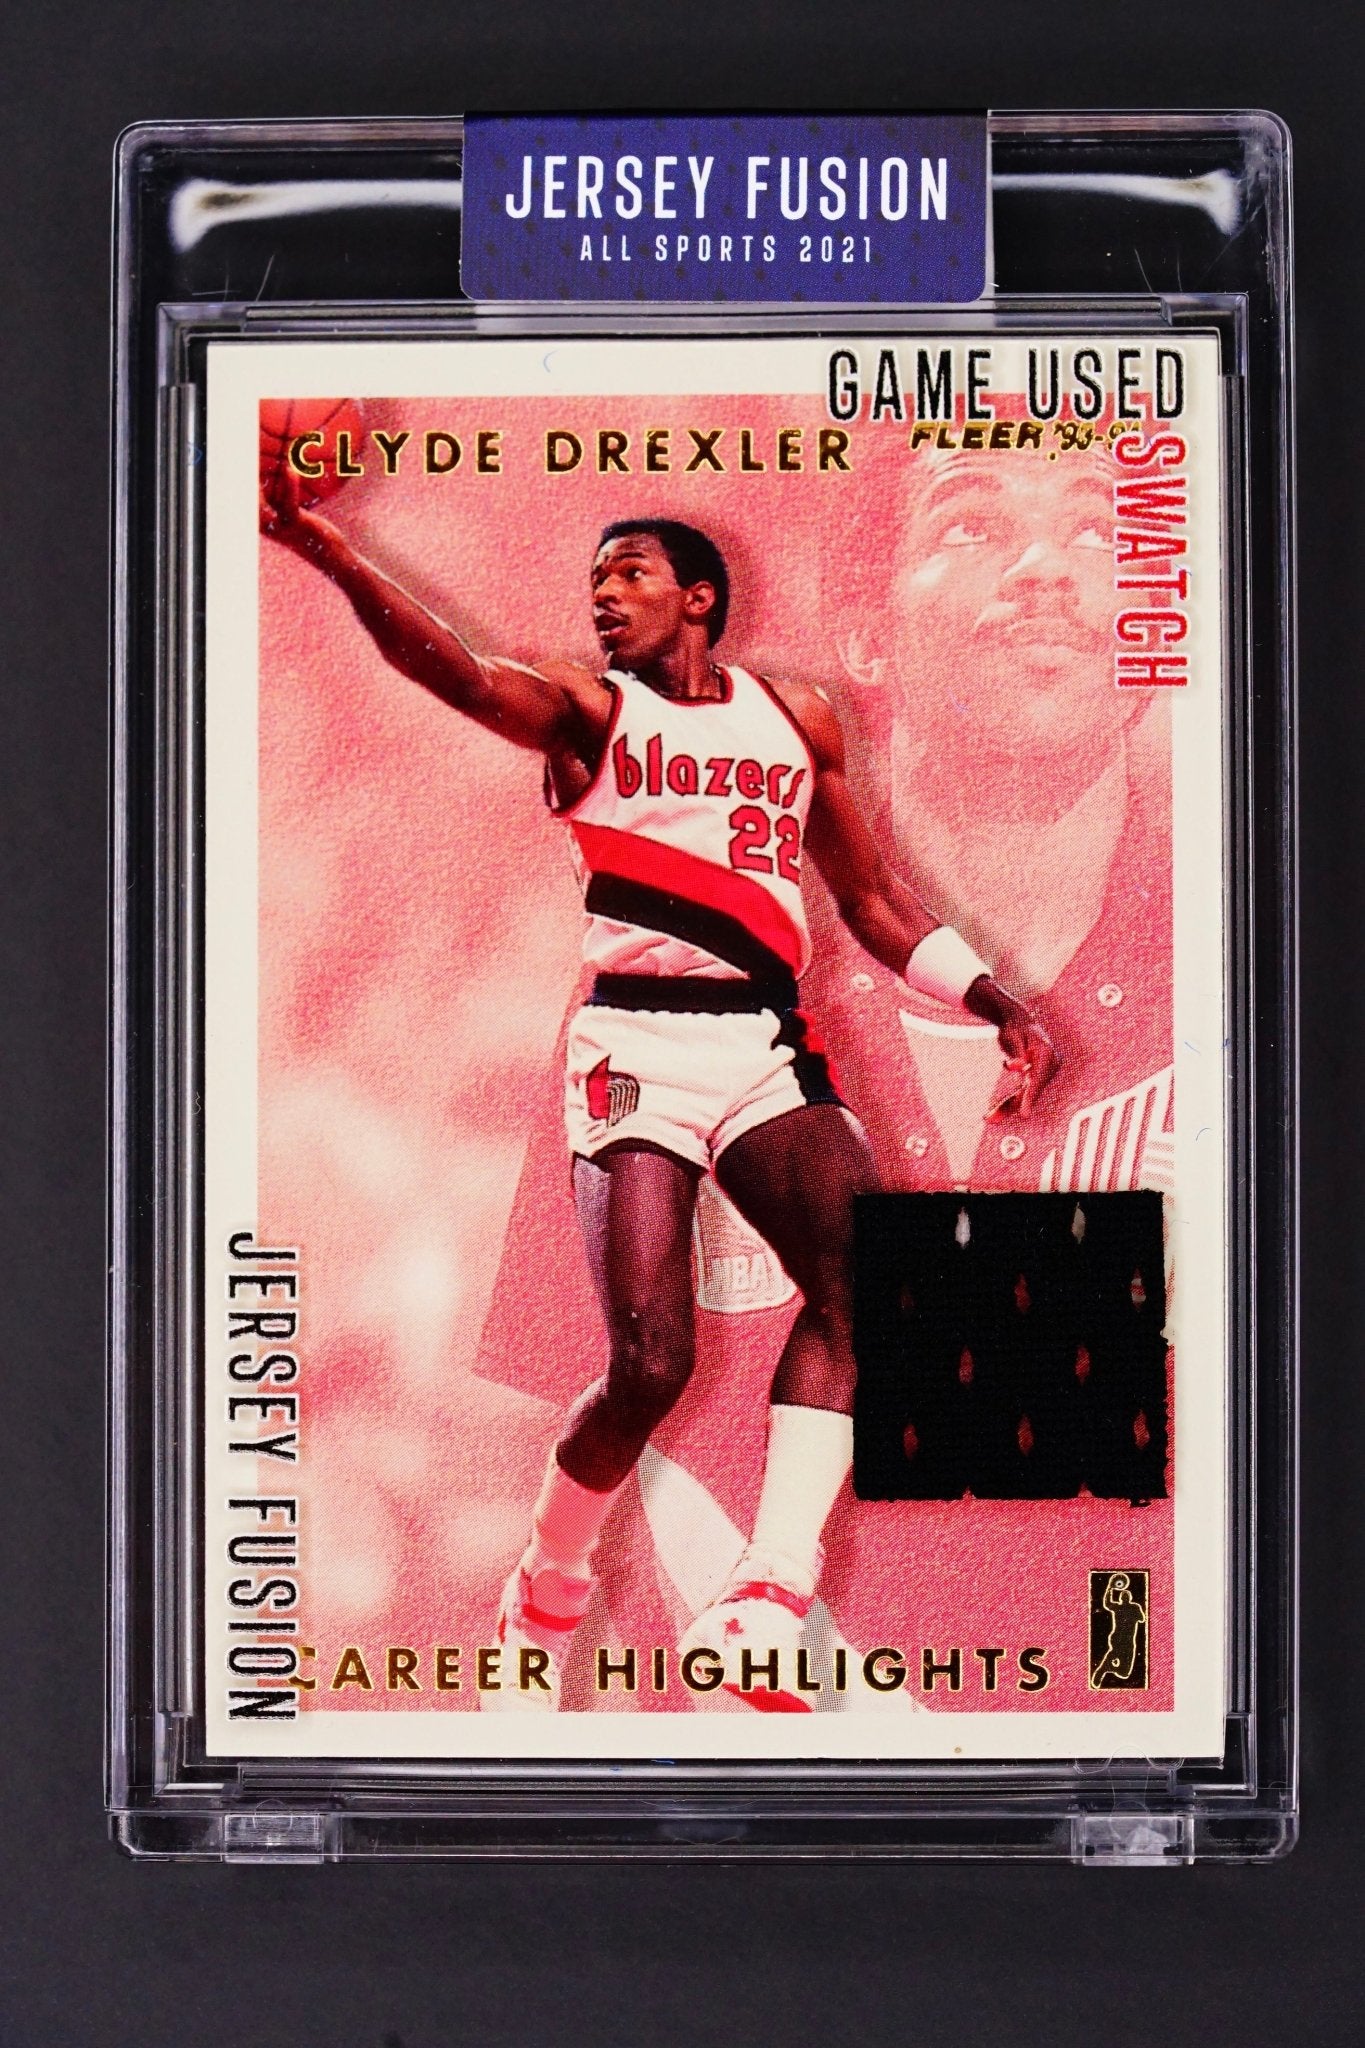 Basketball card: CLYDE DREXLER Game used - Jersey Fusion 1/1 - THE CARD SPOT PTY LTD.Sports CardJersey Fusion